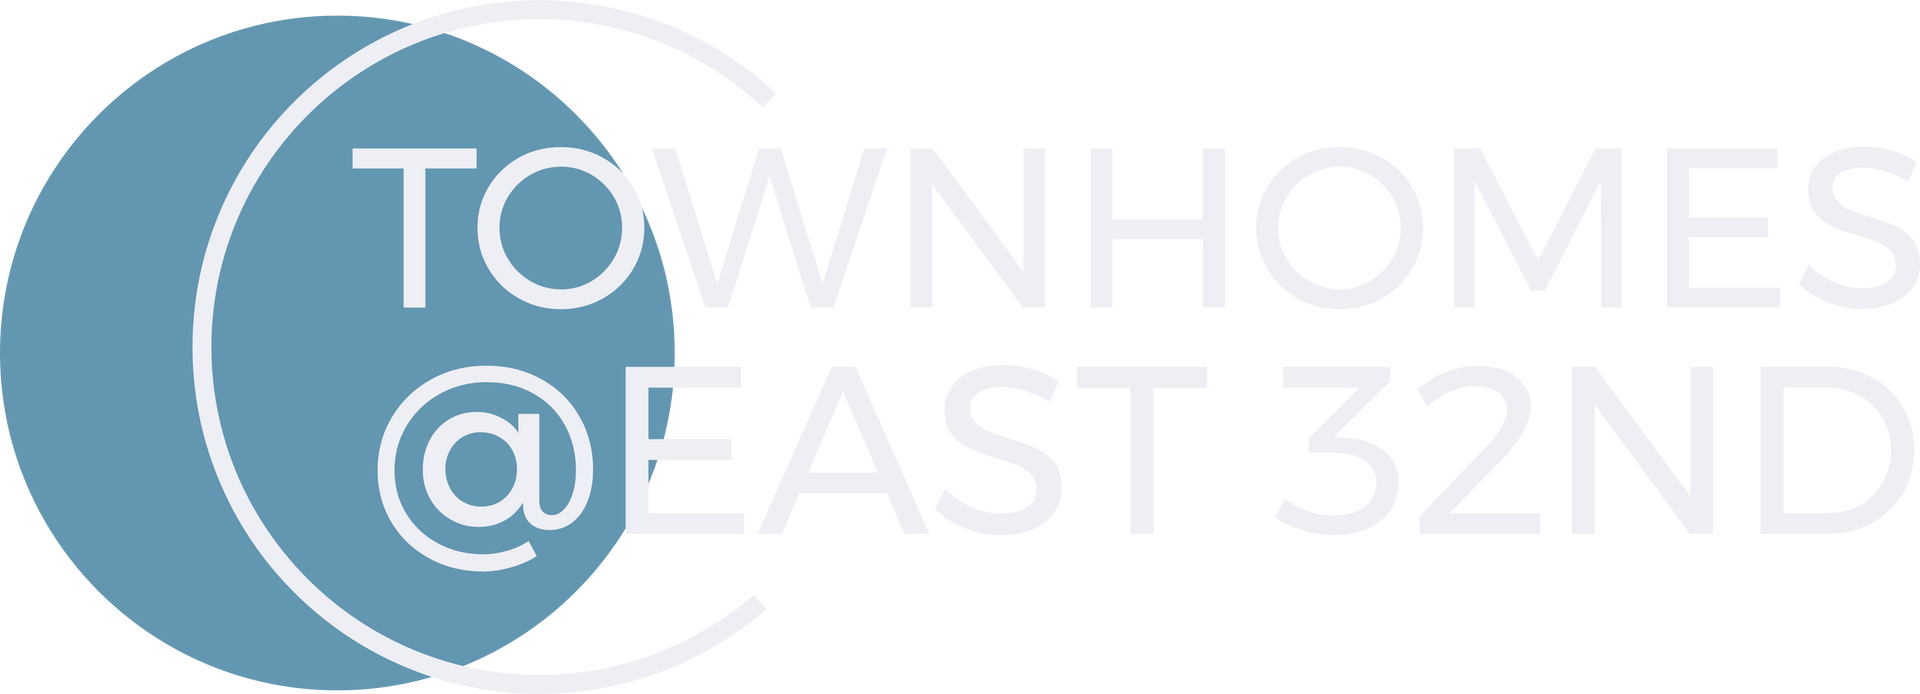 Townhomes @East 32nd Logo - Footer